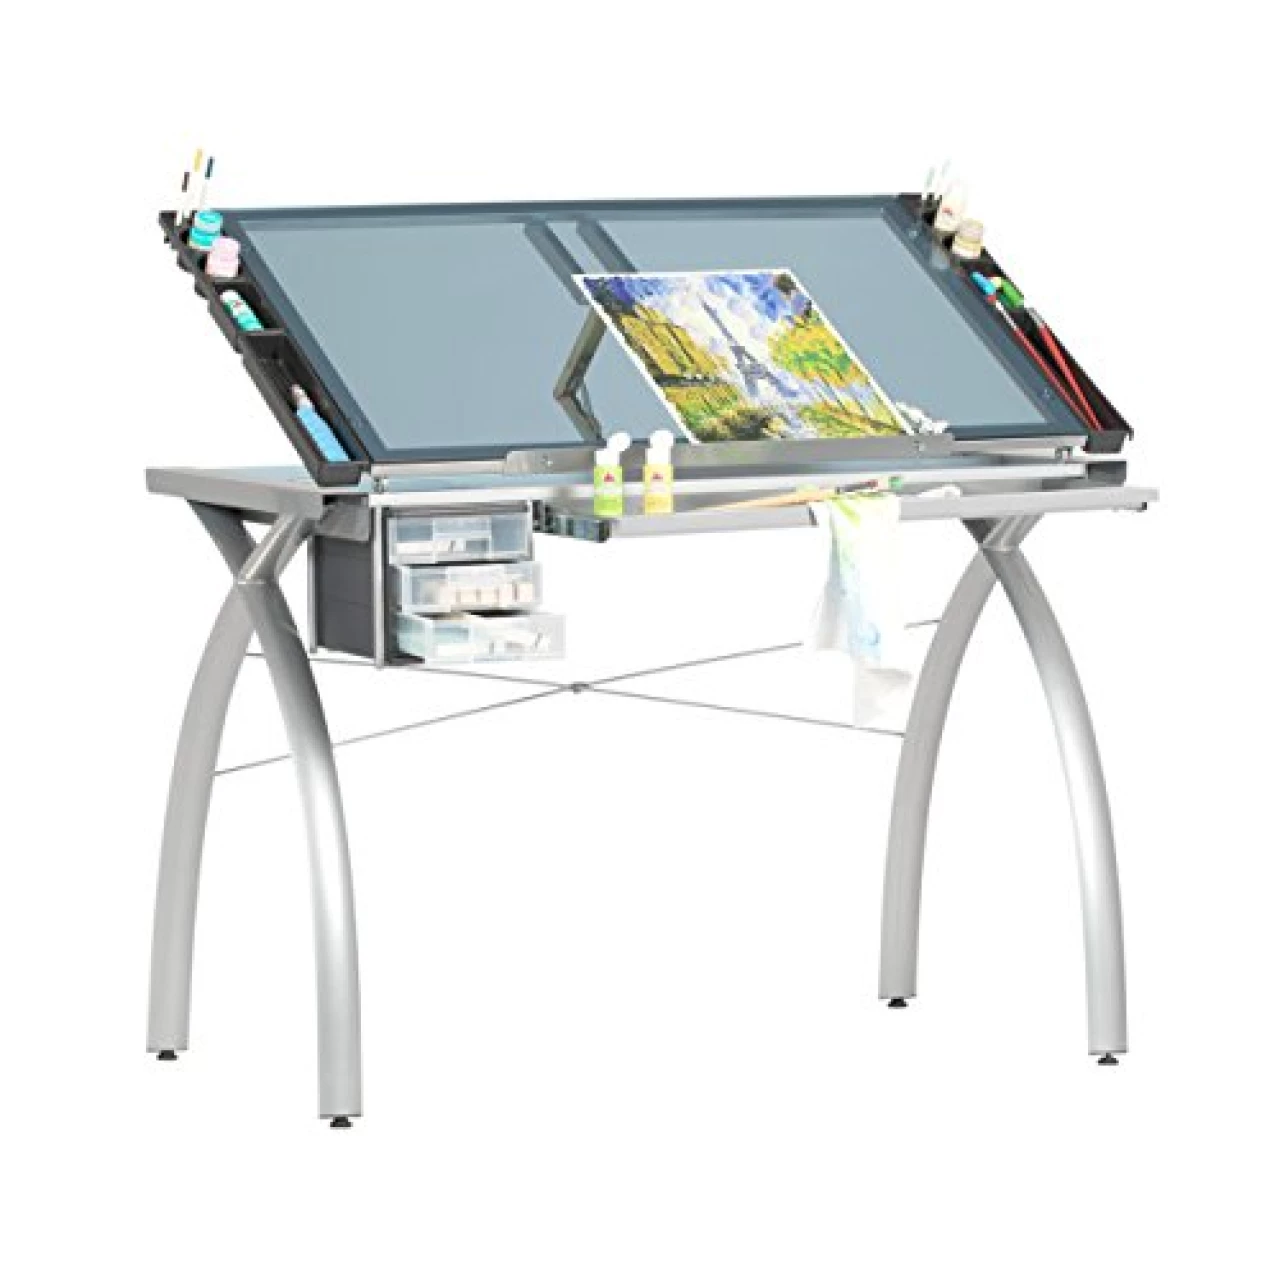 Studio Designs Futura Craft and Drawing Station - 38&quot; W x 24&quot; D Tempered Blue Glass Drafting Table with Pencil Drawers, Side Trays, and Built-In Pencil Ledge - Angle Adjustable Work Surface